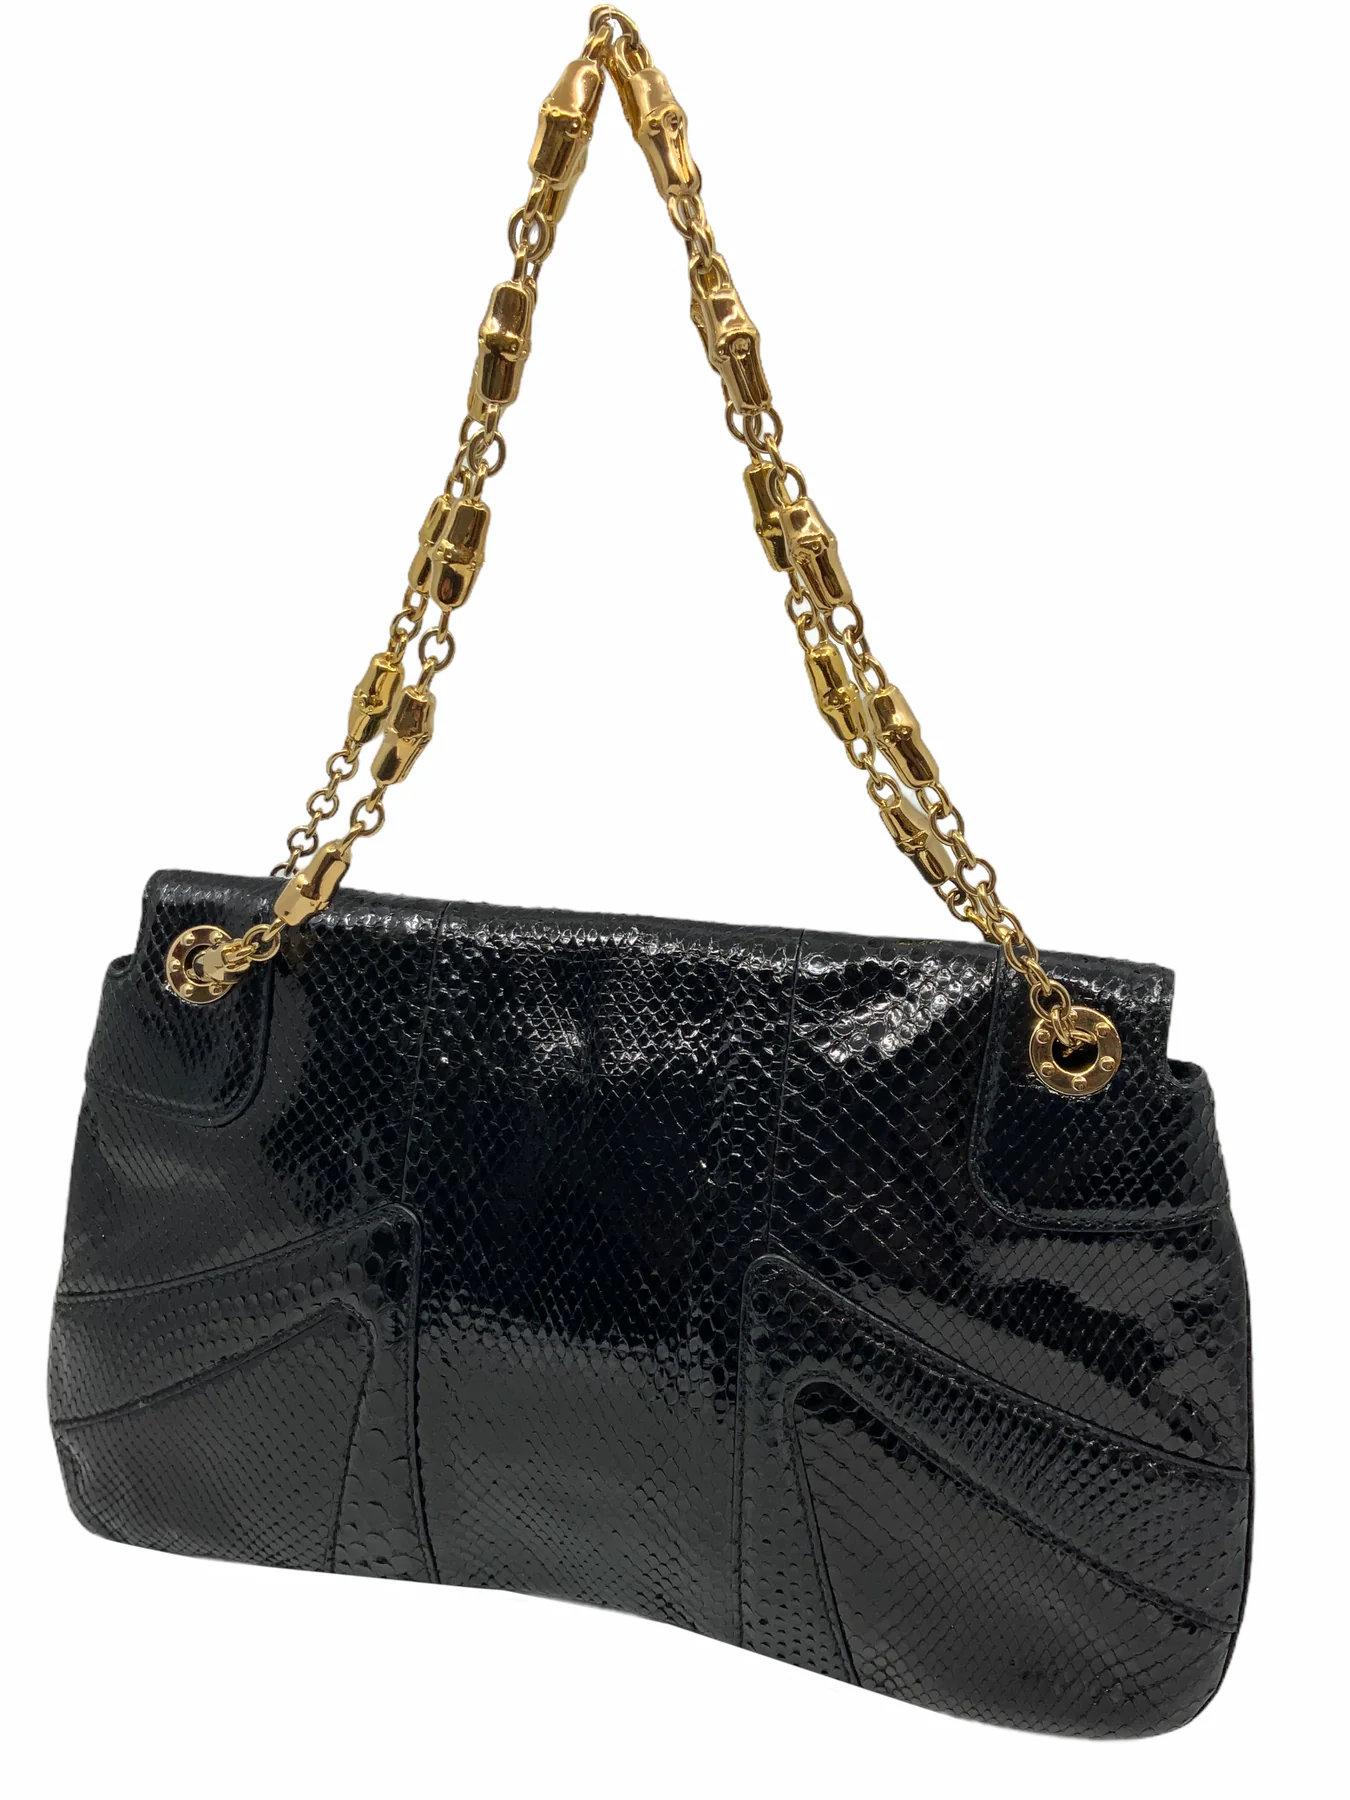 Women's TOM FORD for GUCCI LIMITED EDITION  SNAKESKIN JEWELED DRAGON BAG 